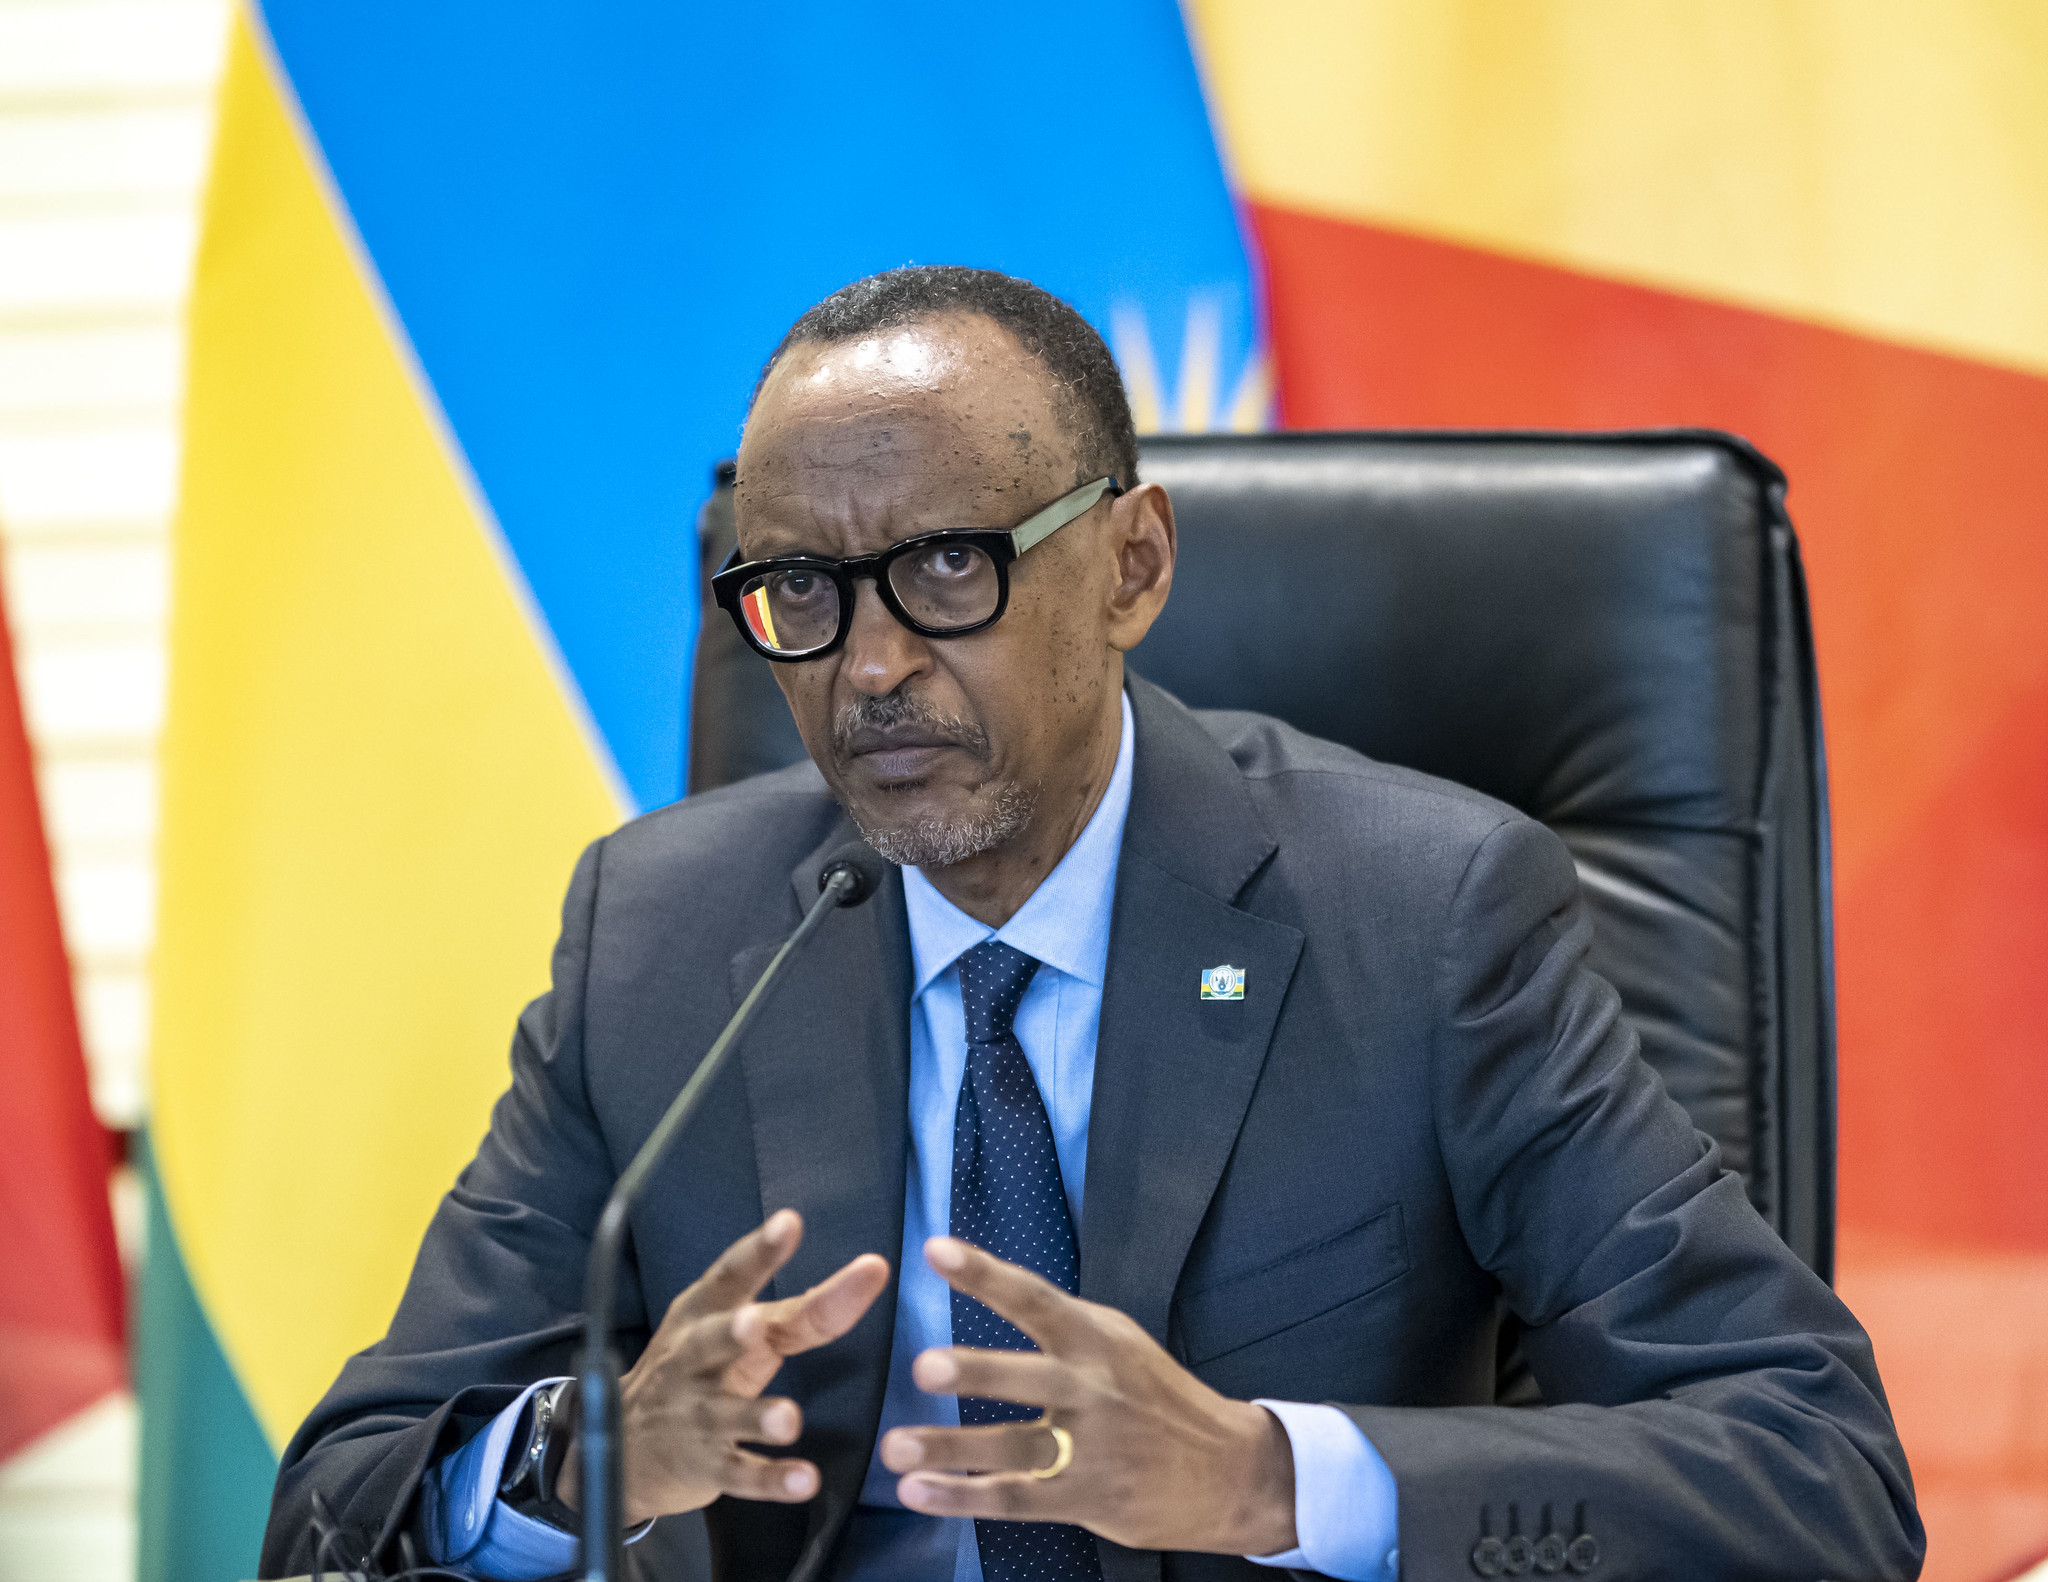 Kagame submits for 4th term candidacy in Rwanda’s election